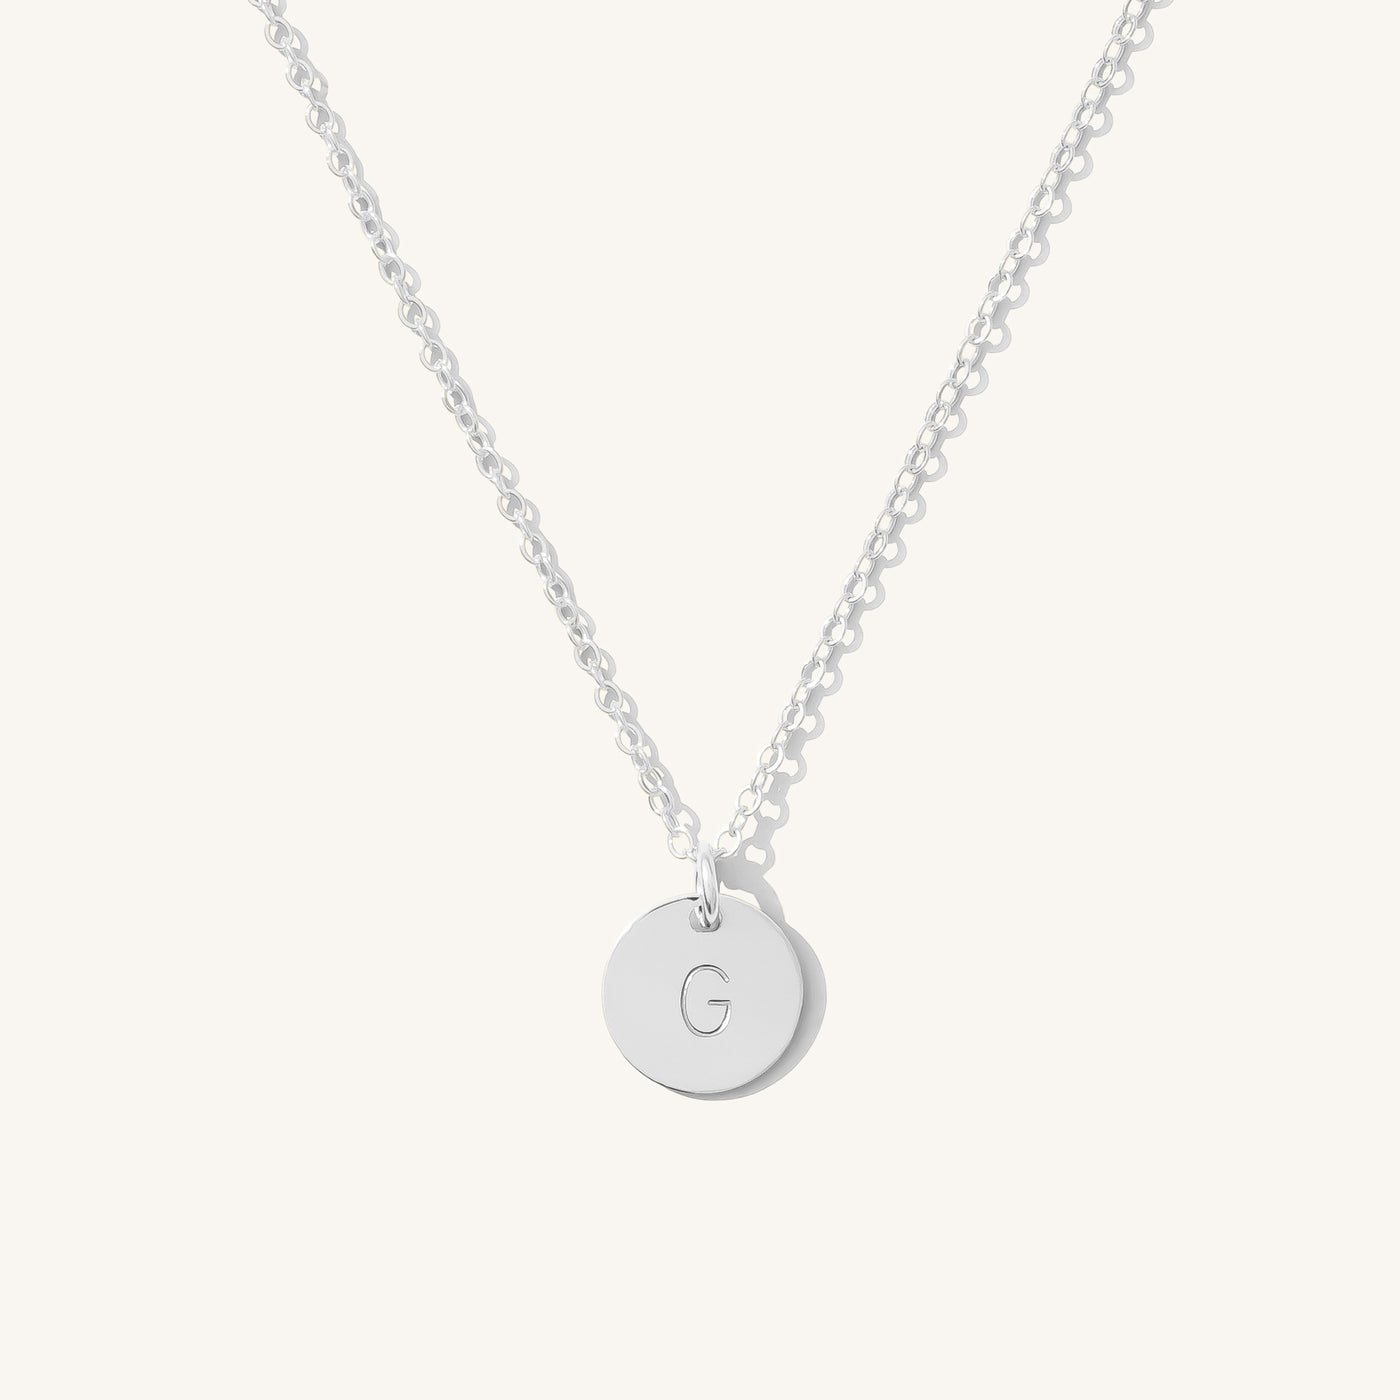 G Dainty Initial Necklace